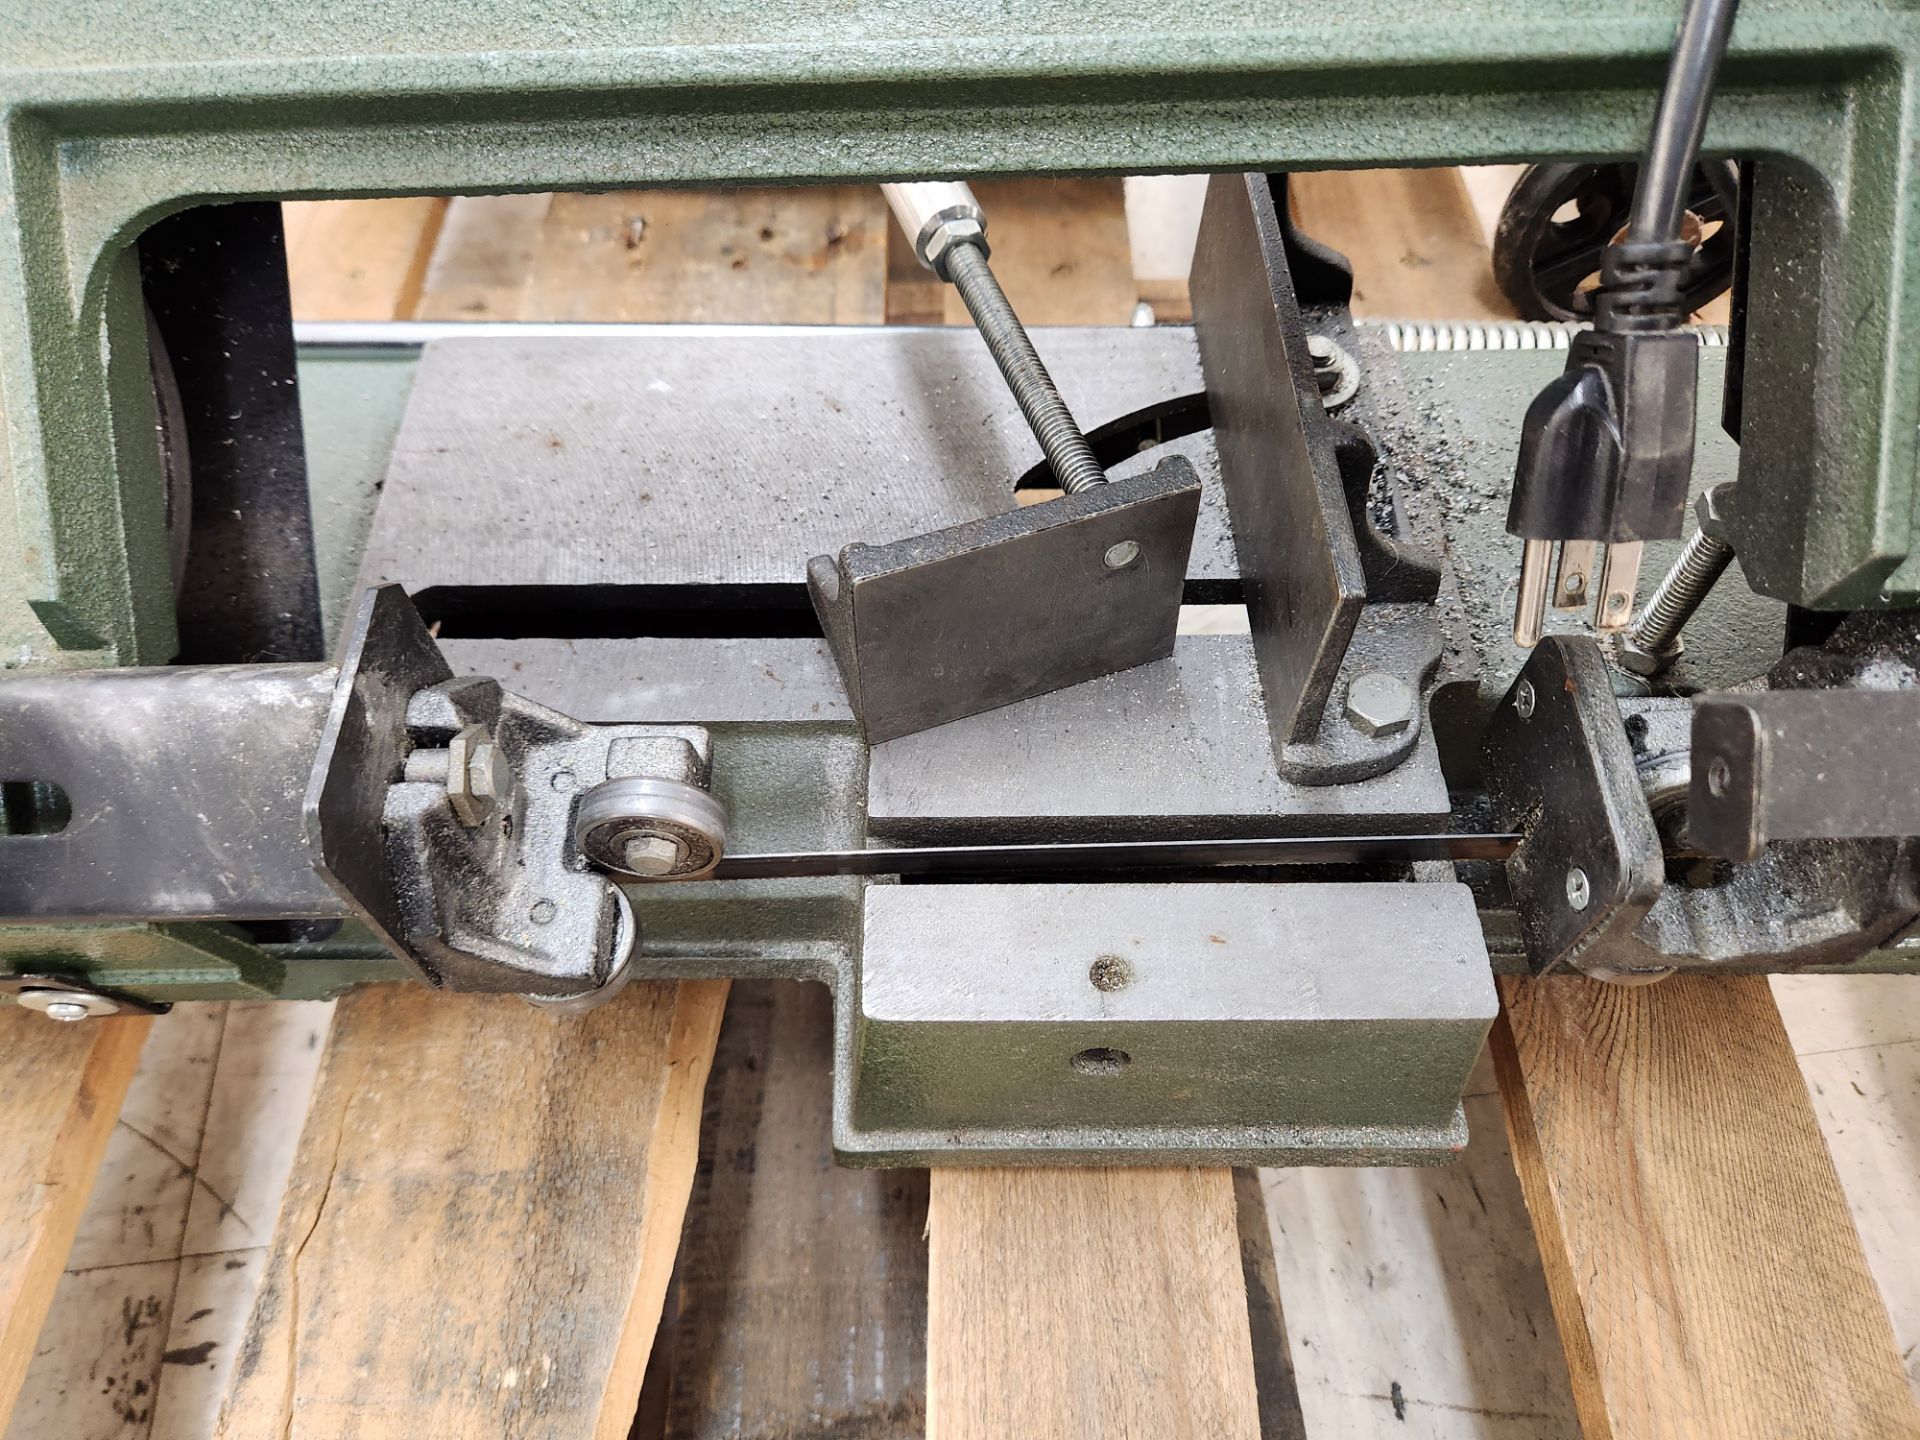 Central Machinery 4-1/2" Metal Cutting Bandsaw - Image 5 of 5